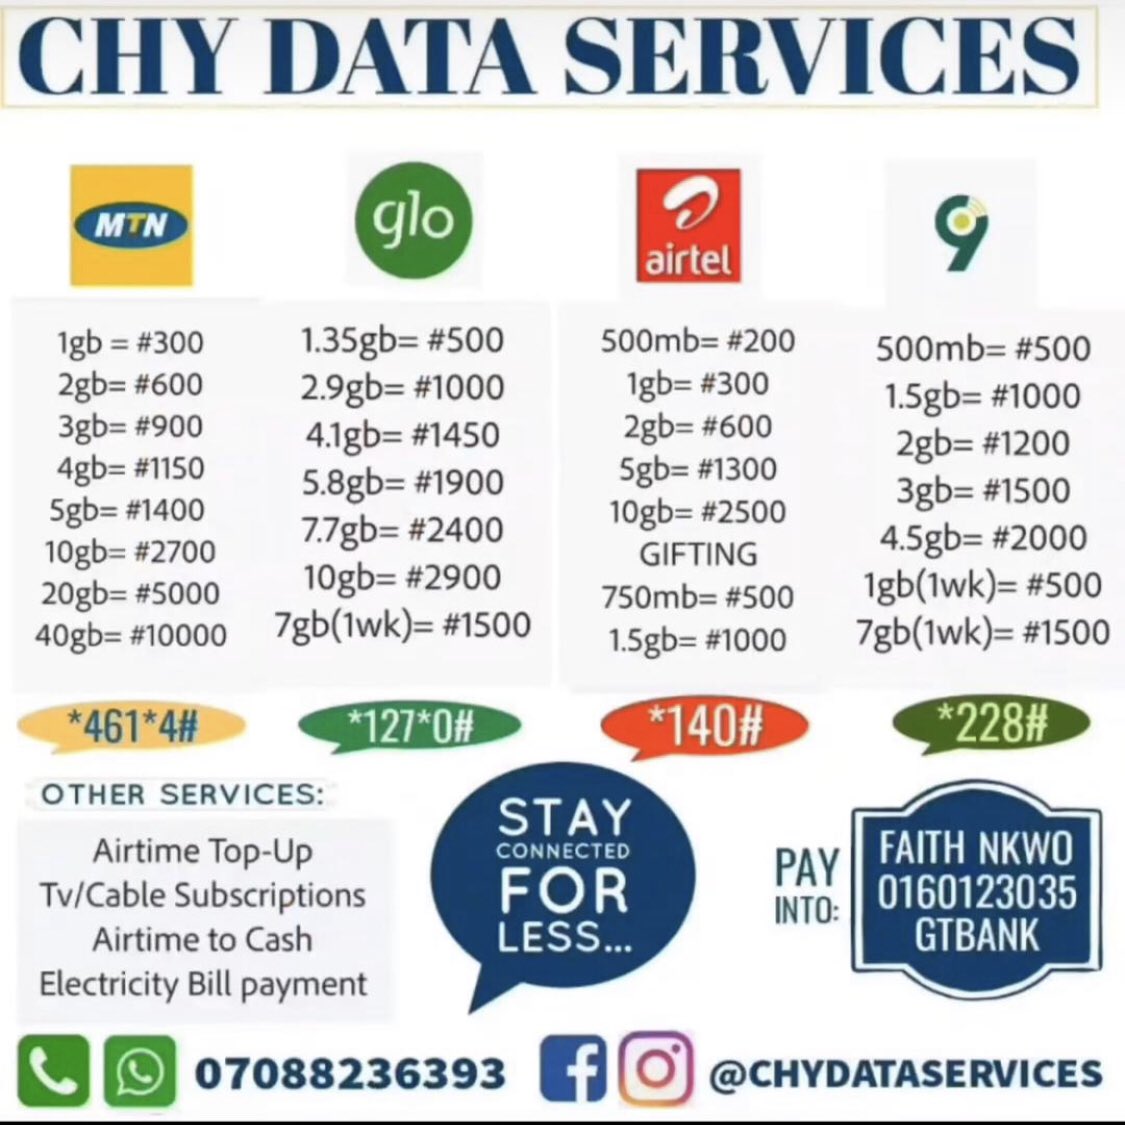 Ever thought about getting your data bundles at the best price??

CHY DATA SERVICES Caters for this need and More

We are:
Affordable ✓
Reliable ✓
Swift✓

Call us now or DM with your orders

#cheapdata 
#MTNDATA 
#smedata 
#chydataservices